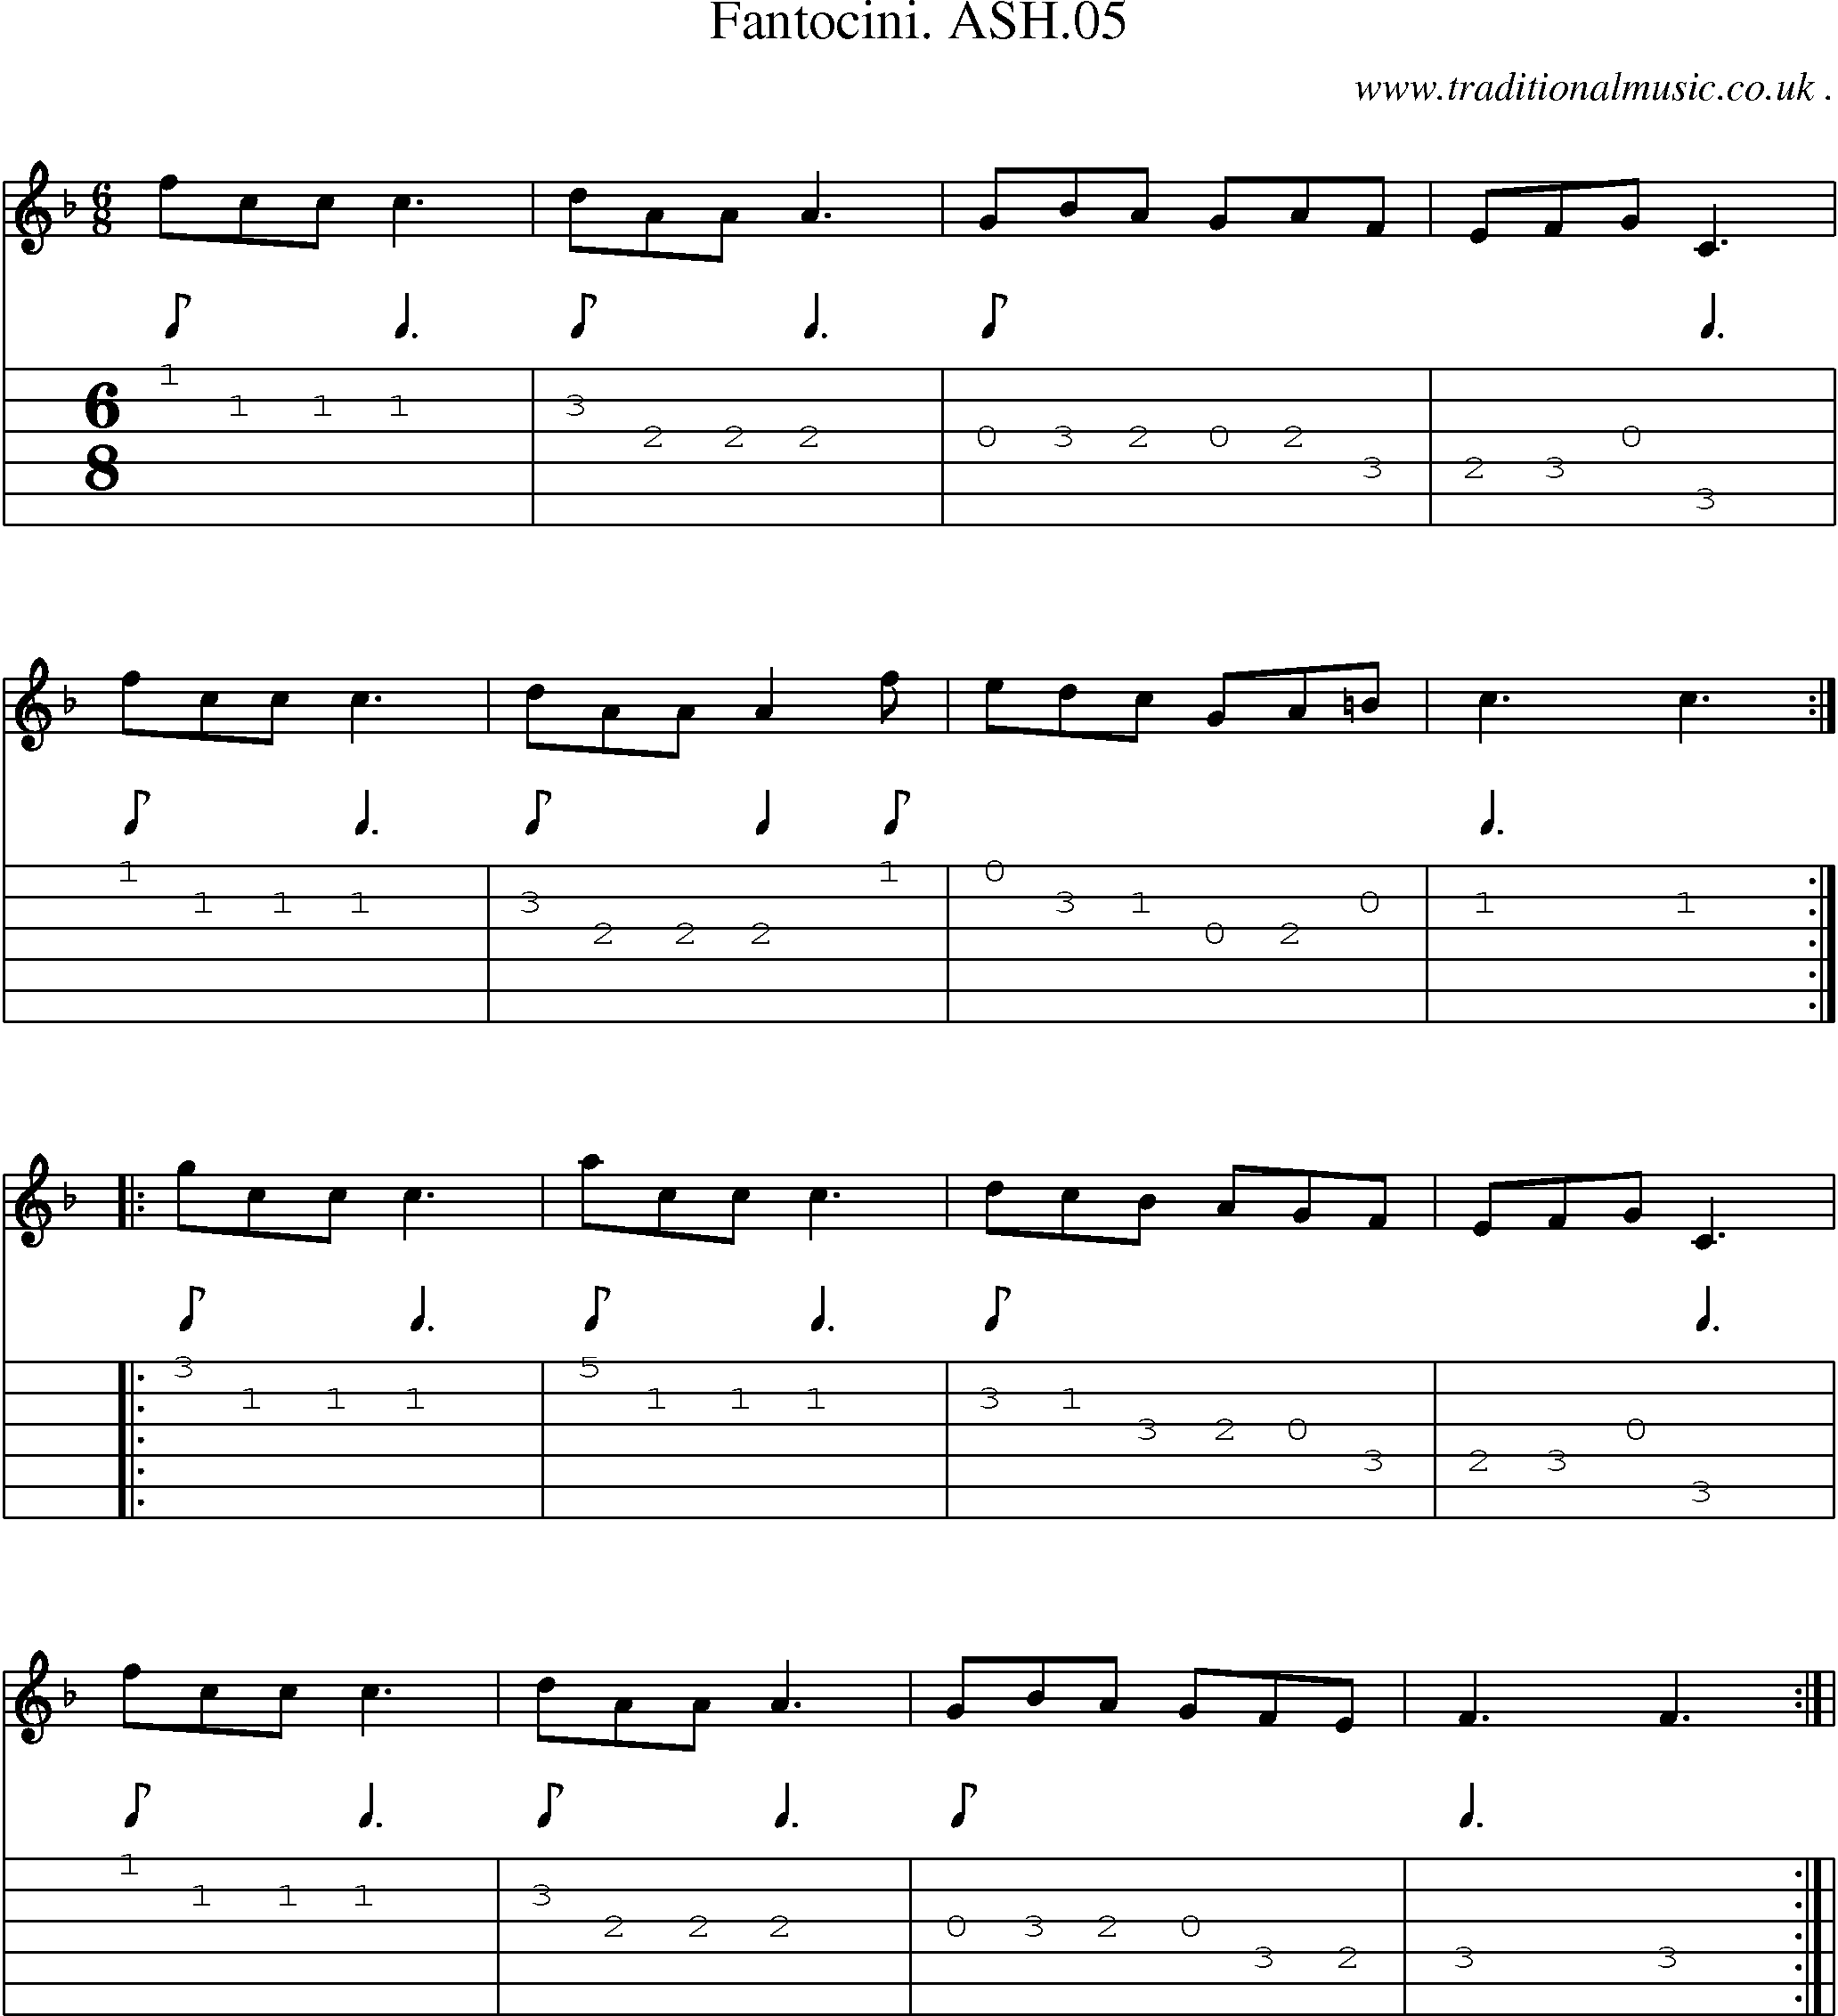 Sheet-Music and Guitar Tabs for Fantocini Ash05